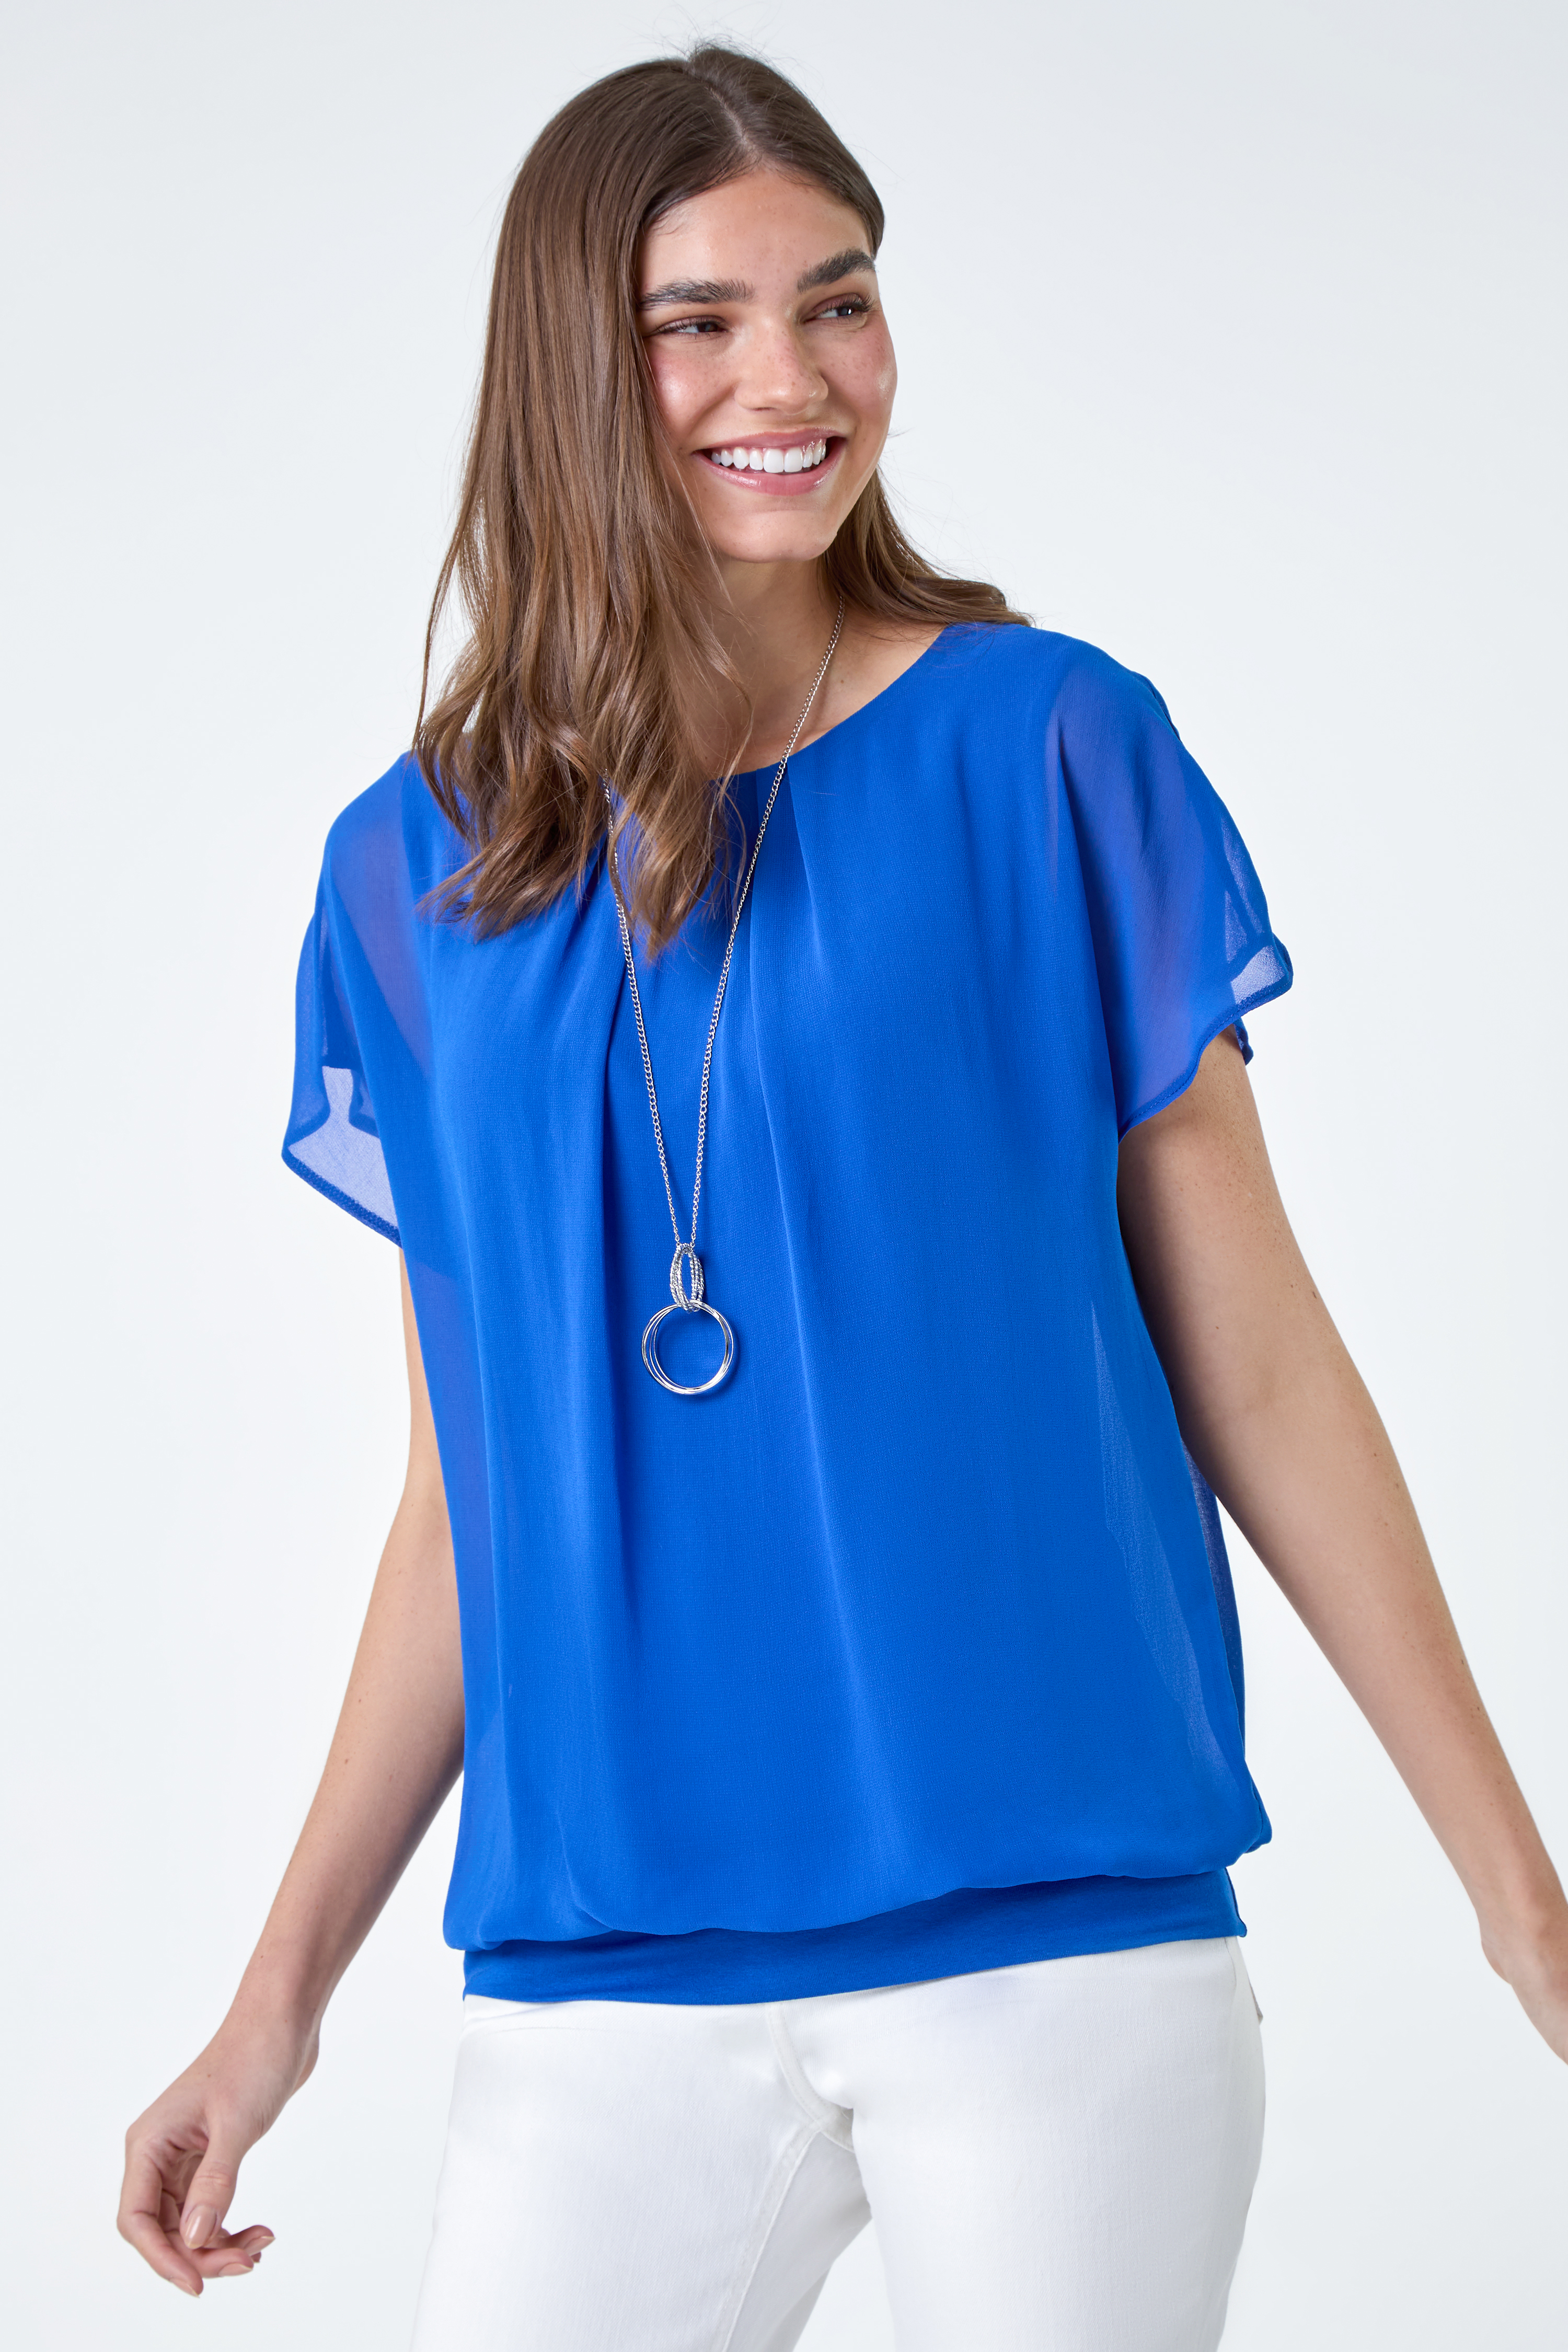 Royal Blue Chiffon Jersey Blouson Top with Necklace, Image 2 of 5